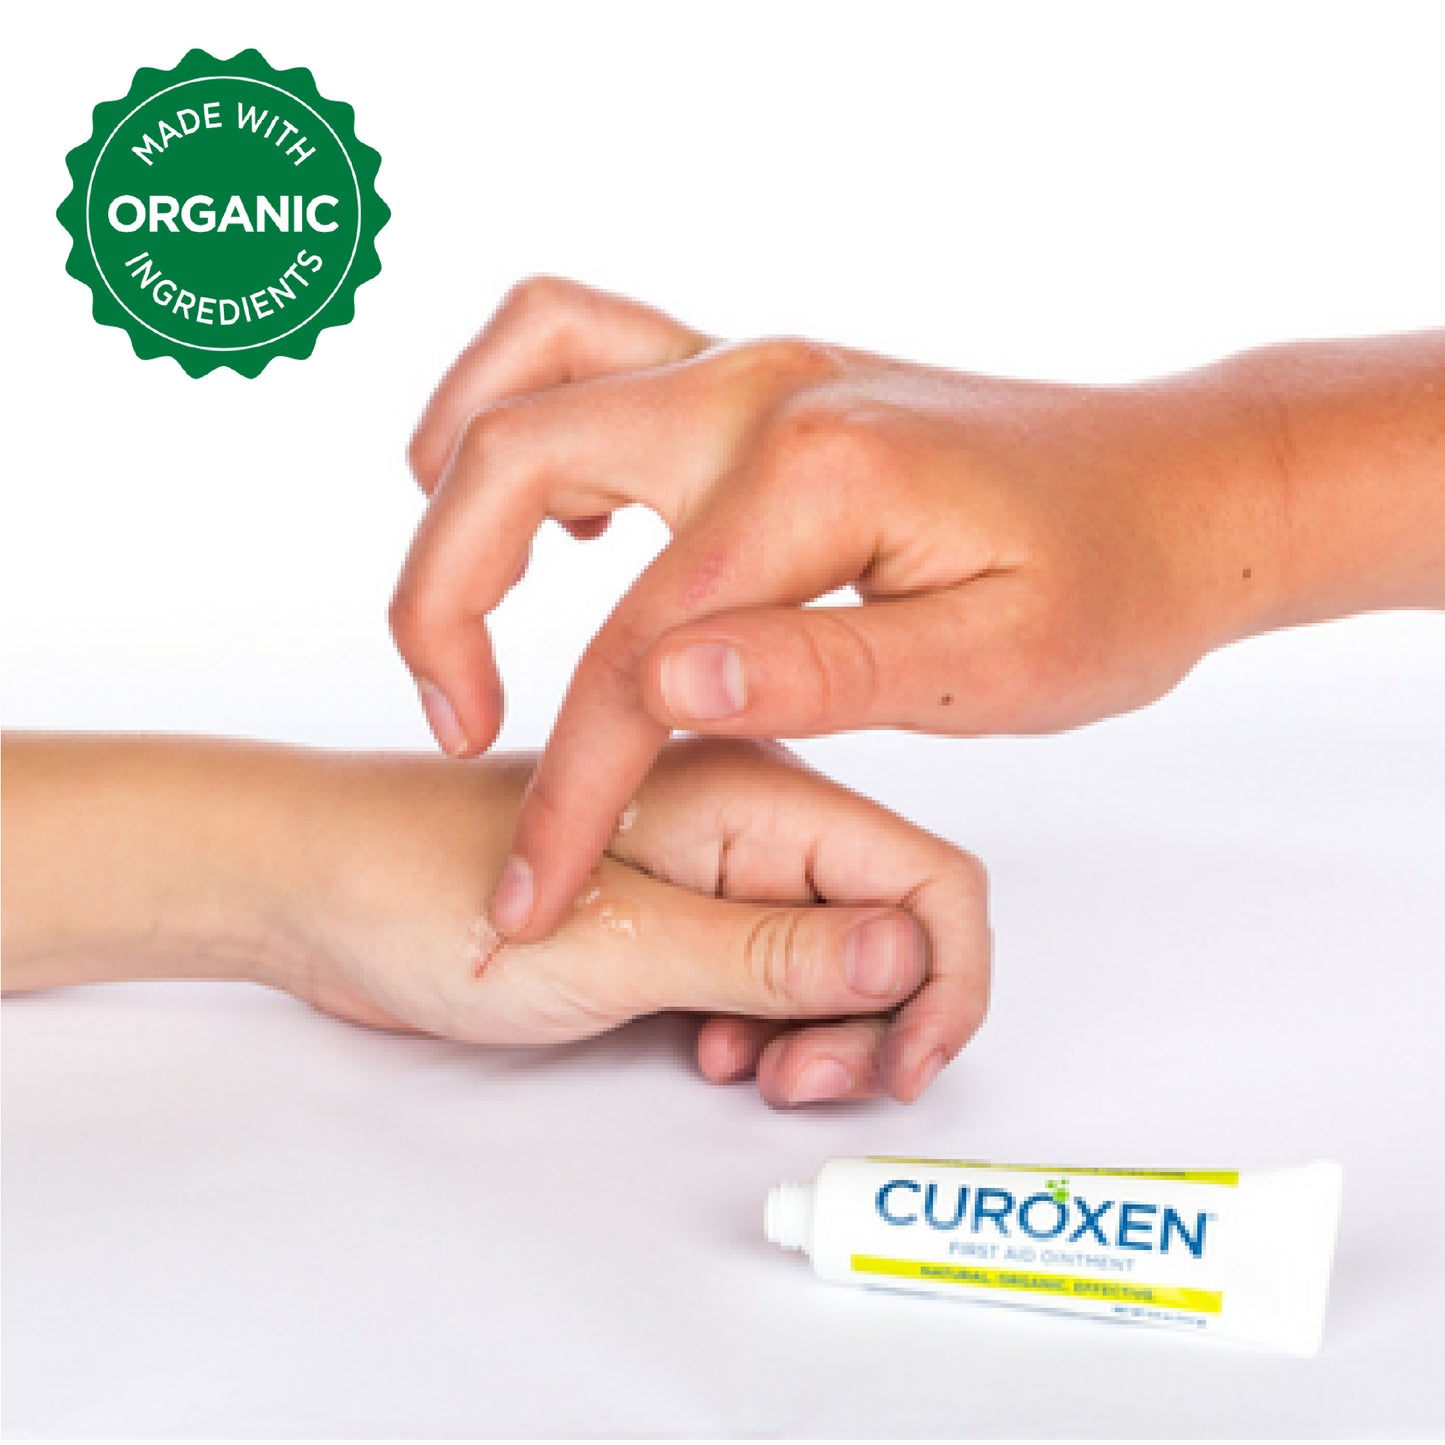 Curoxen first aide cream made with organic ingredients.